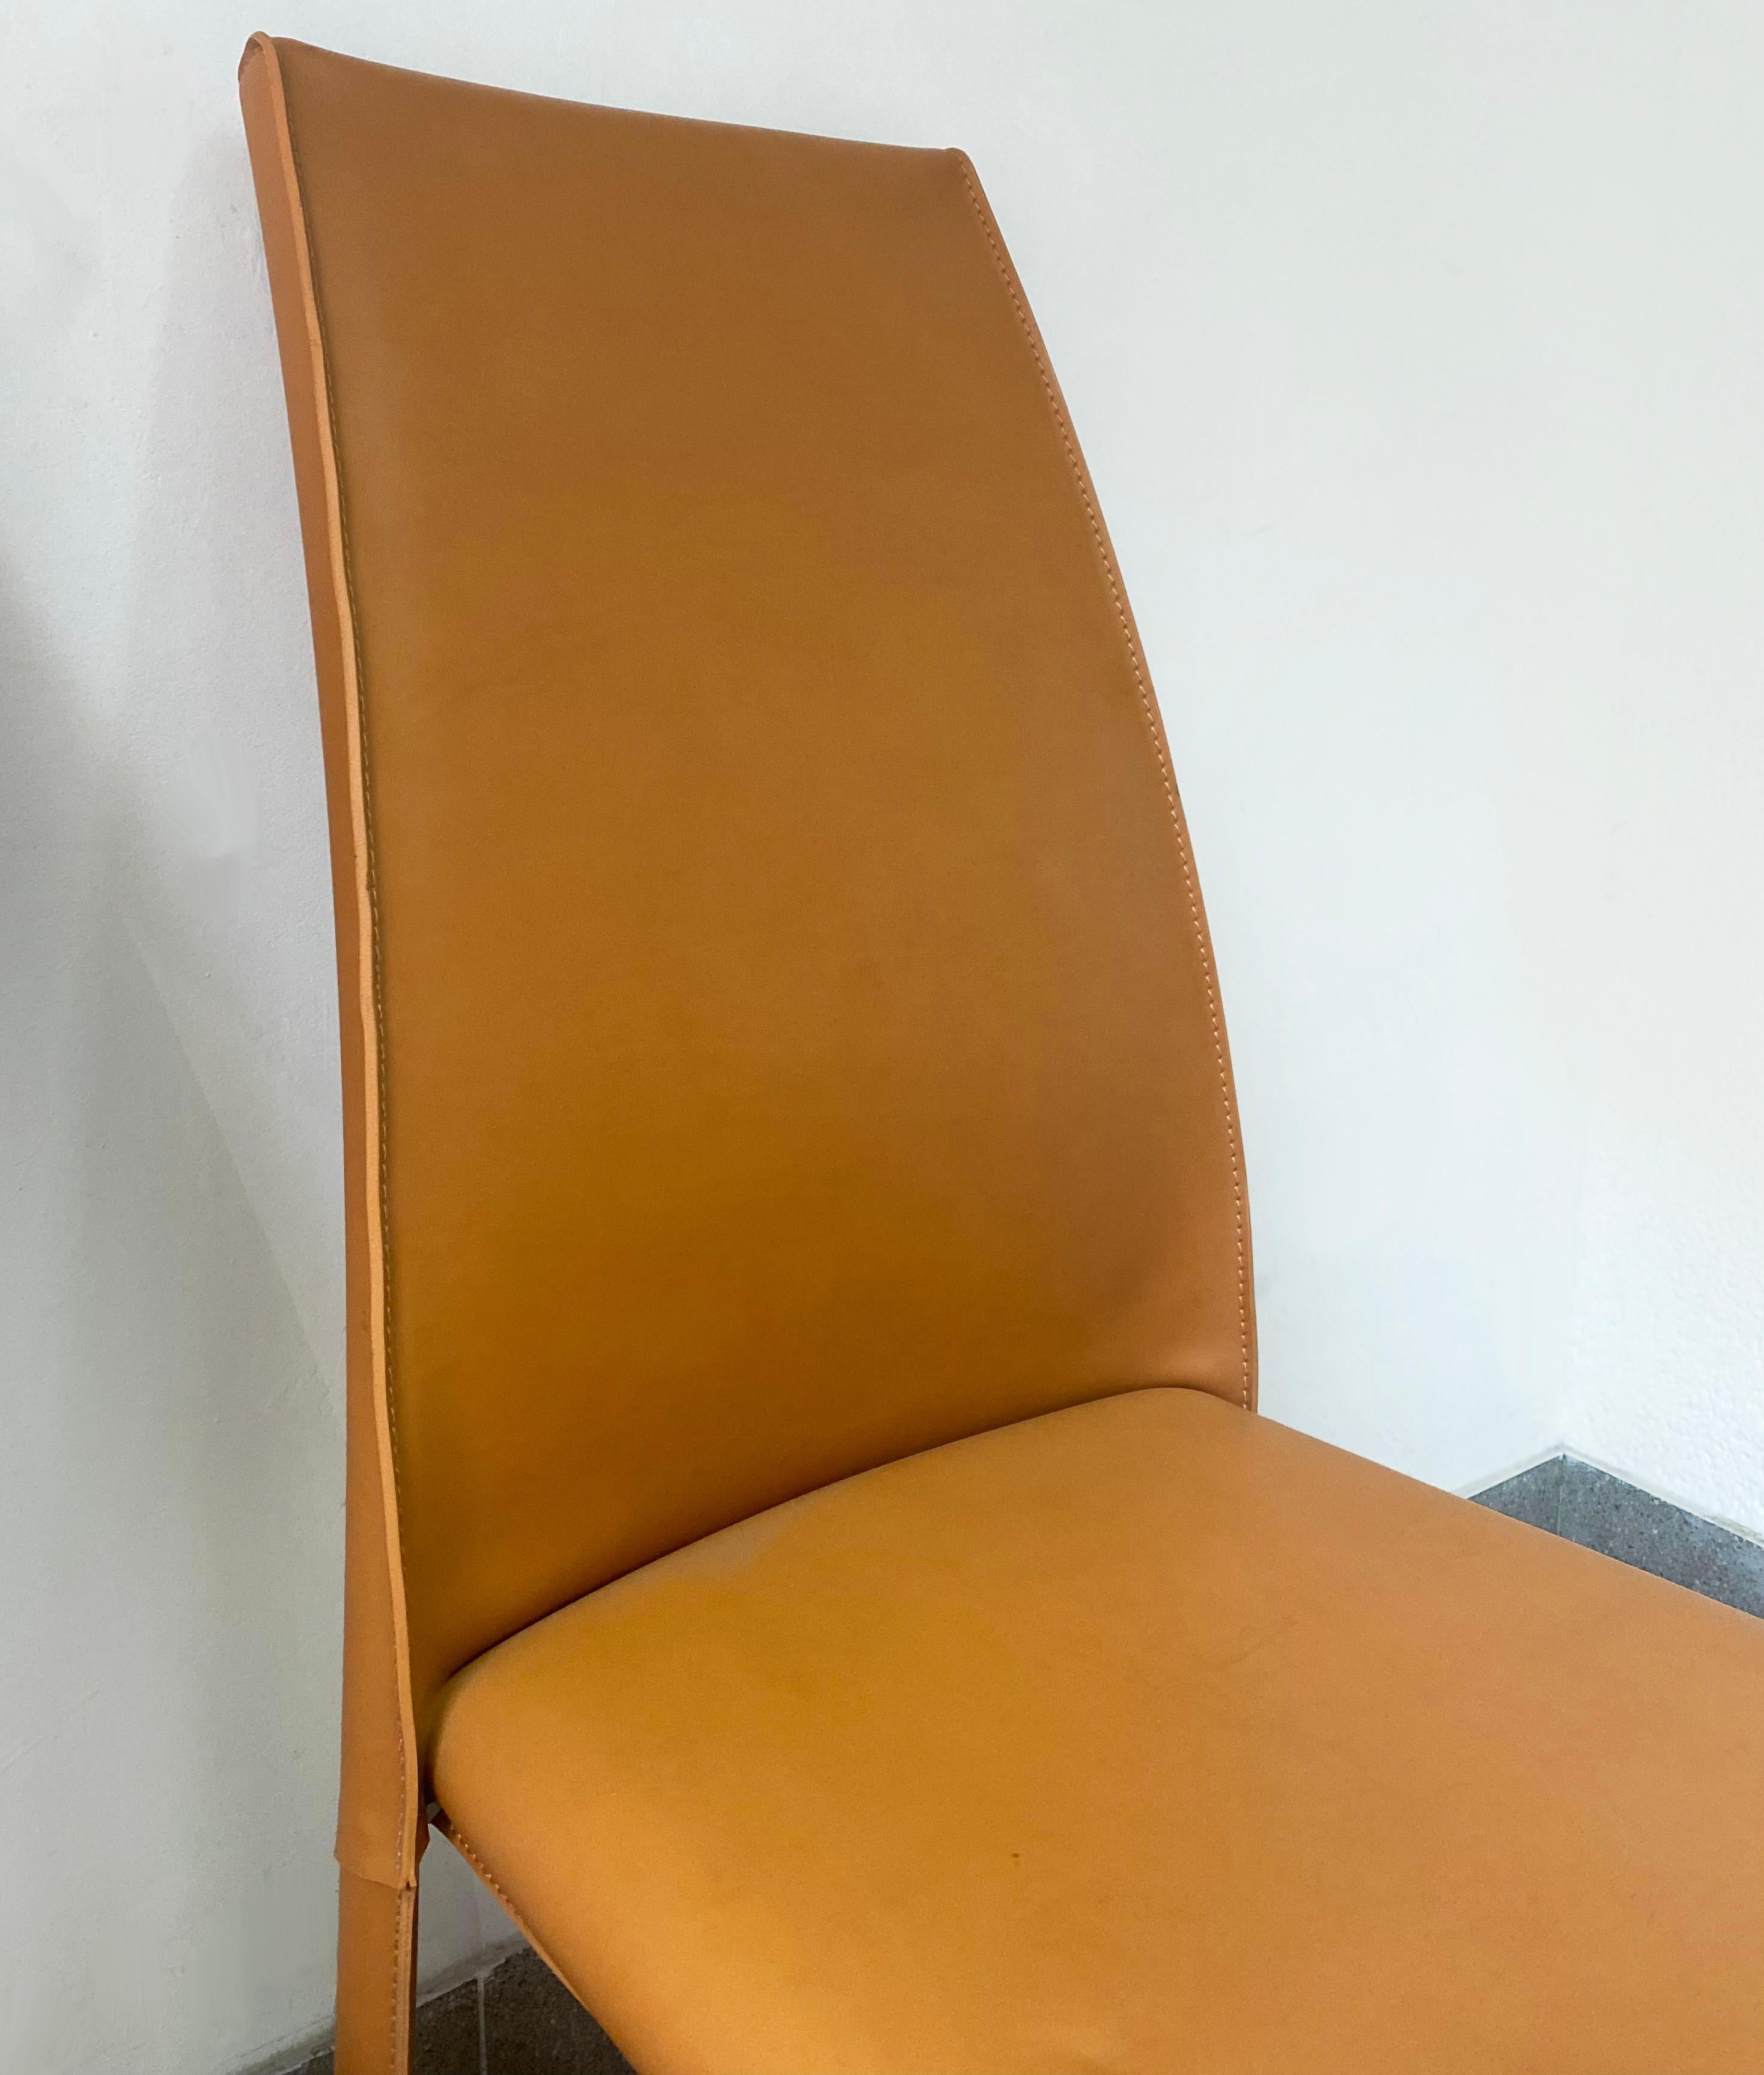 Poltrona Frau, Pair of Frag Chairs Fawn Leather In Good Condition For Sale In Saint ouen, FR